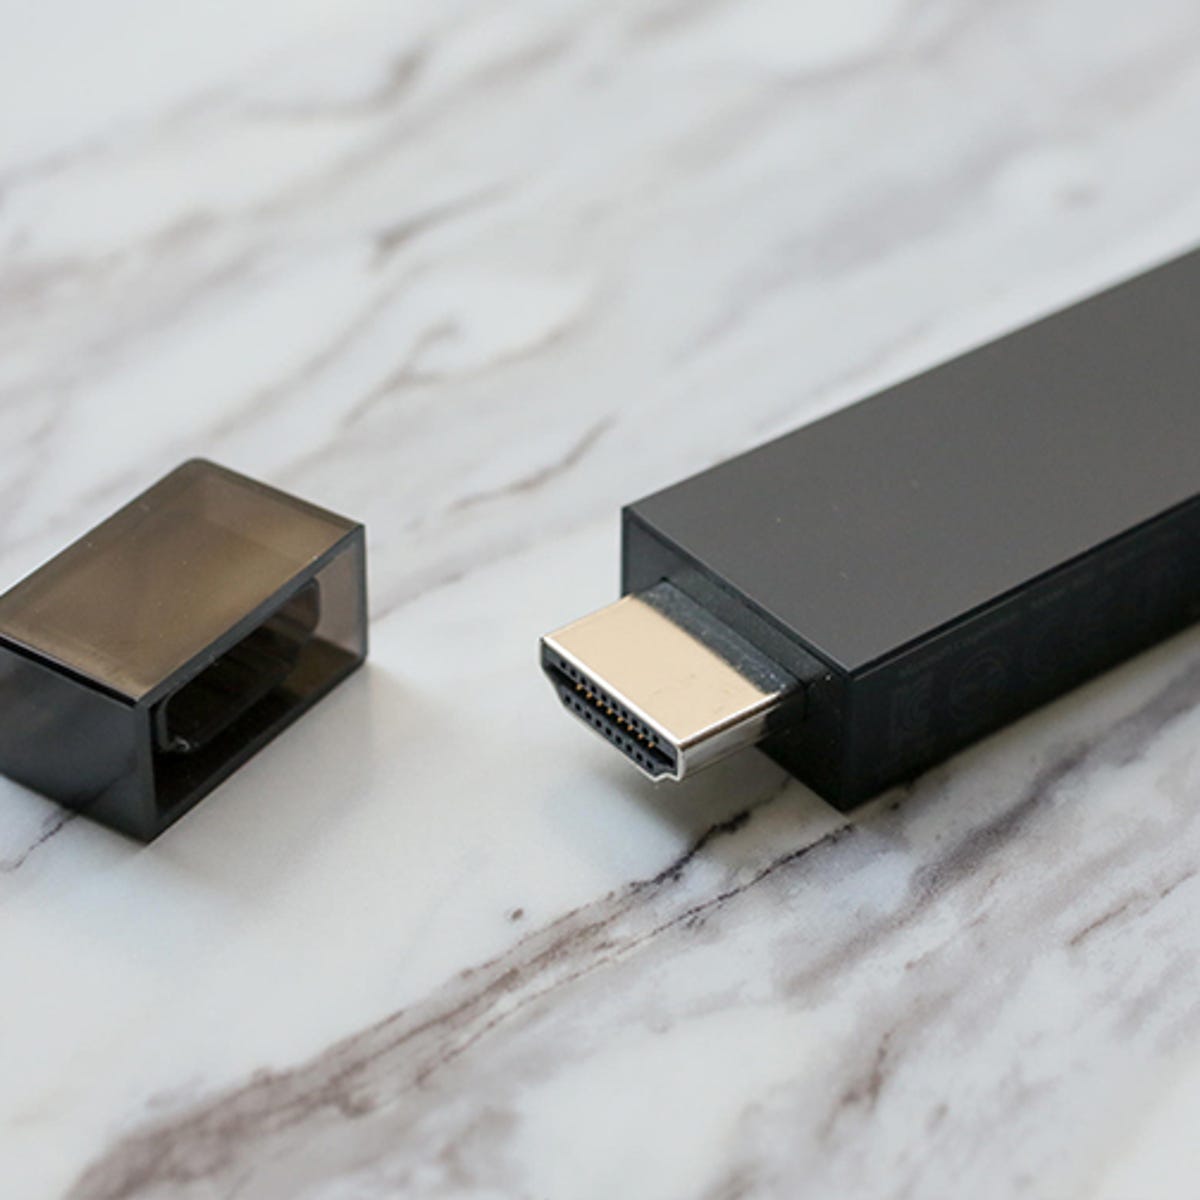 Microsoft Wireless Display Adapter review: Beam your laptop or